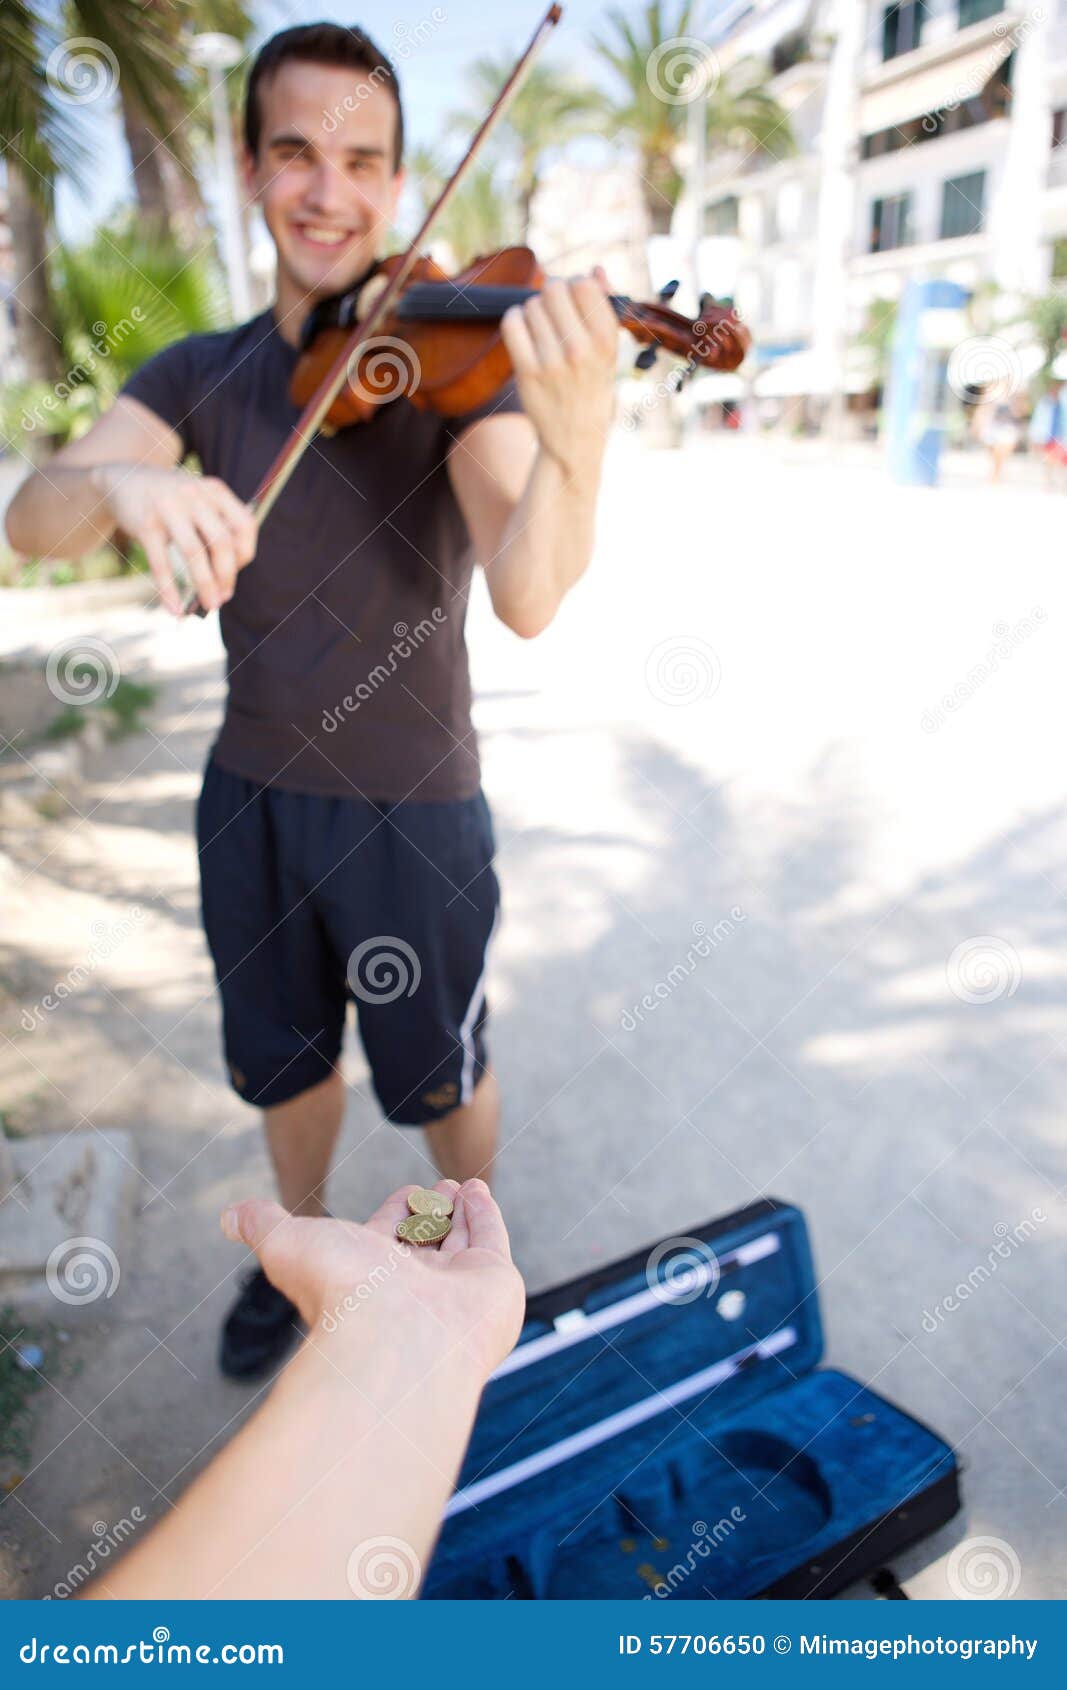 smiling male busker playing violin